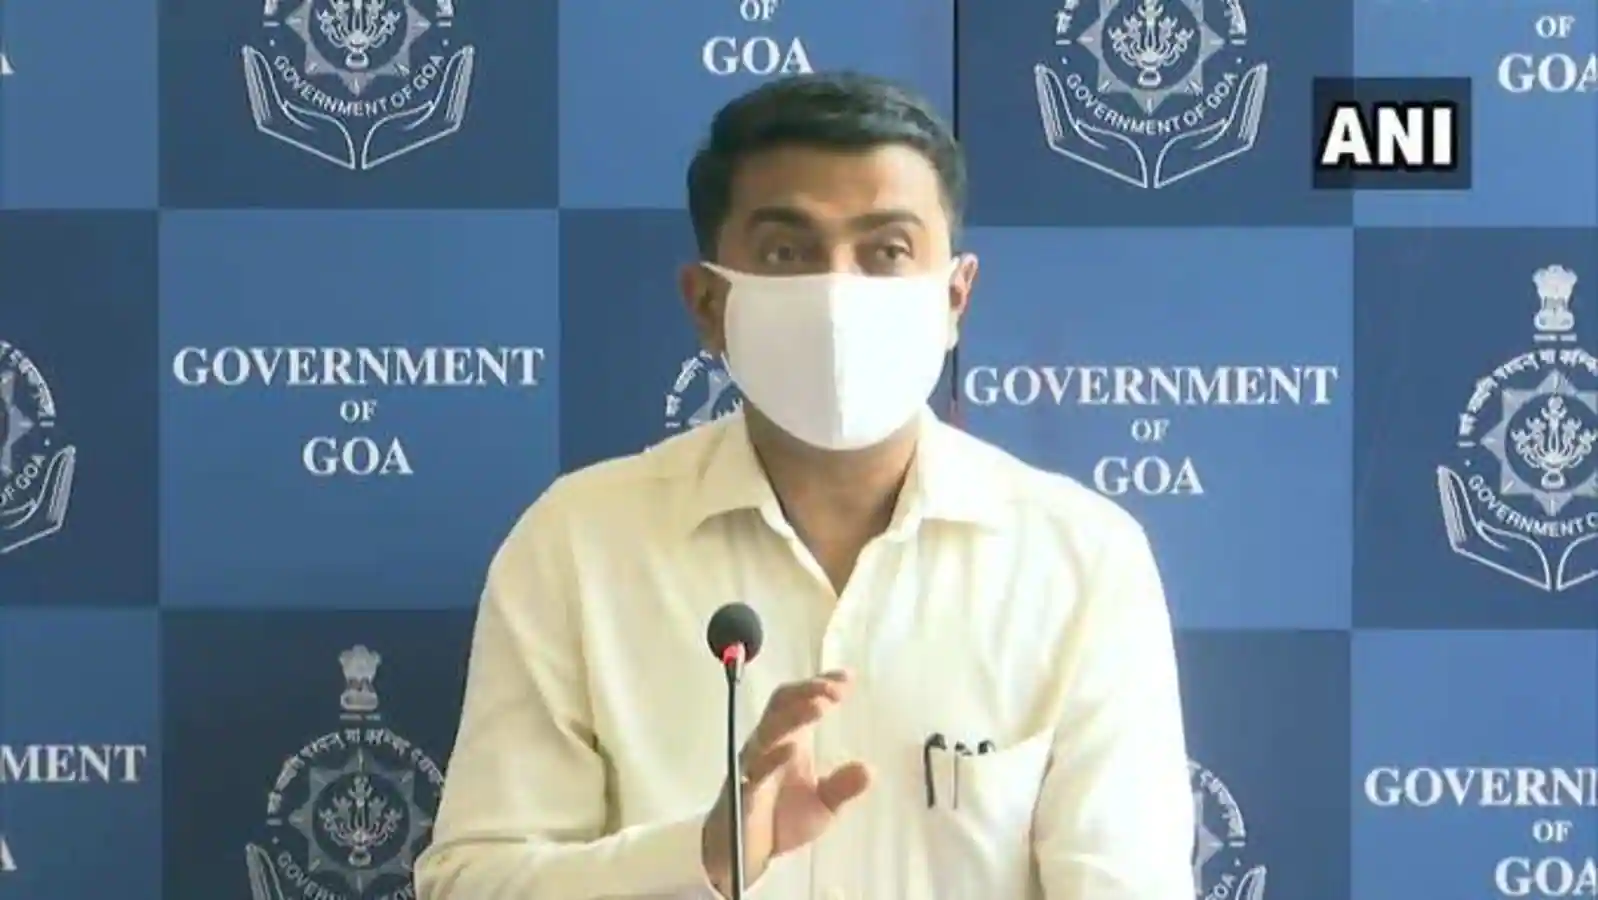 oa Chief Minister Pramod Sawant on Friday announced a 15-day lockdown to overcome the Covid pandemic starting from Sunday. This lockdown will come into force from 9 am on Sunday, 9th May. Restrictions will be implemented throughout the state during this period. However, during this time, from 7 am to 1 pm, the essential services will be allowed.